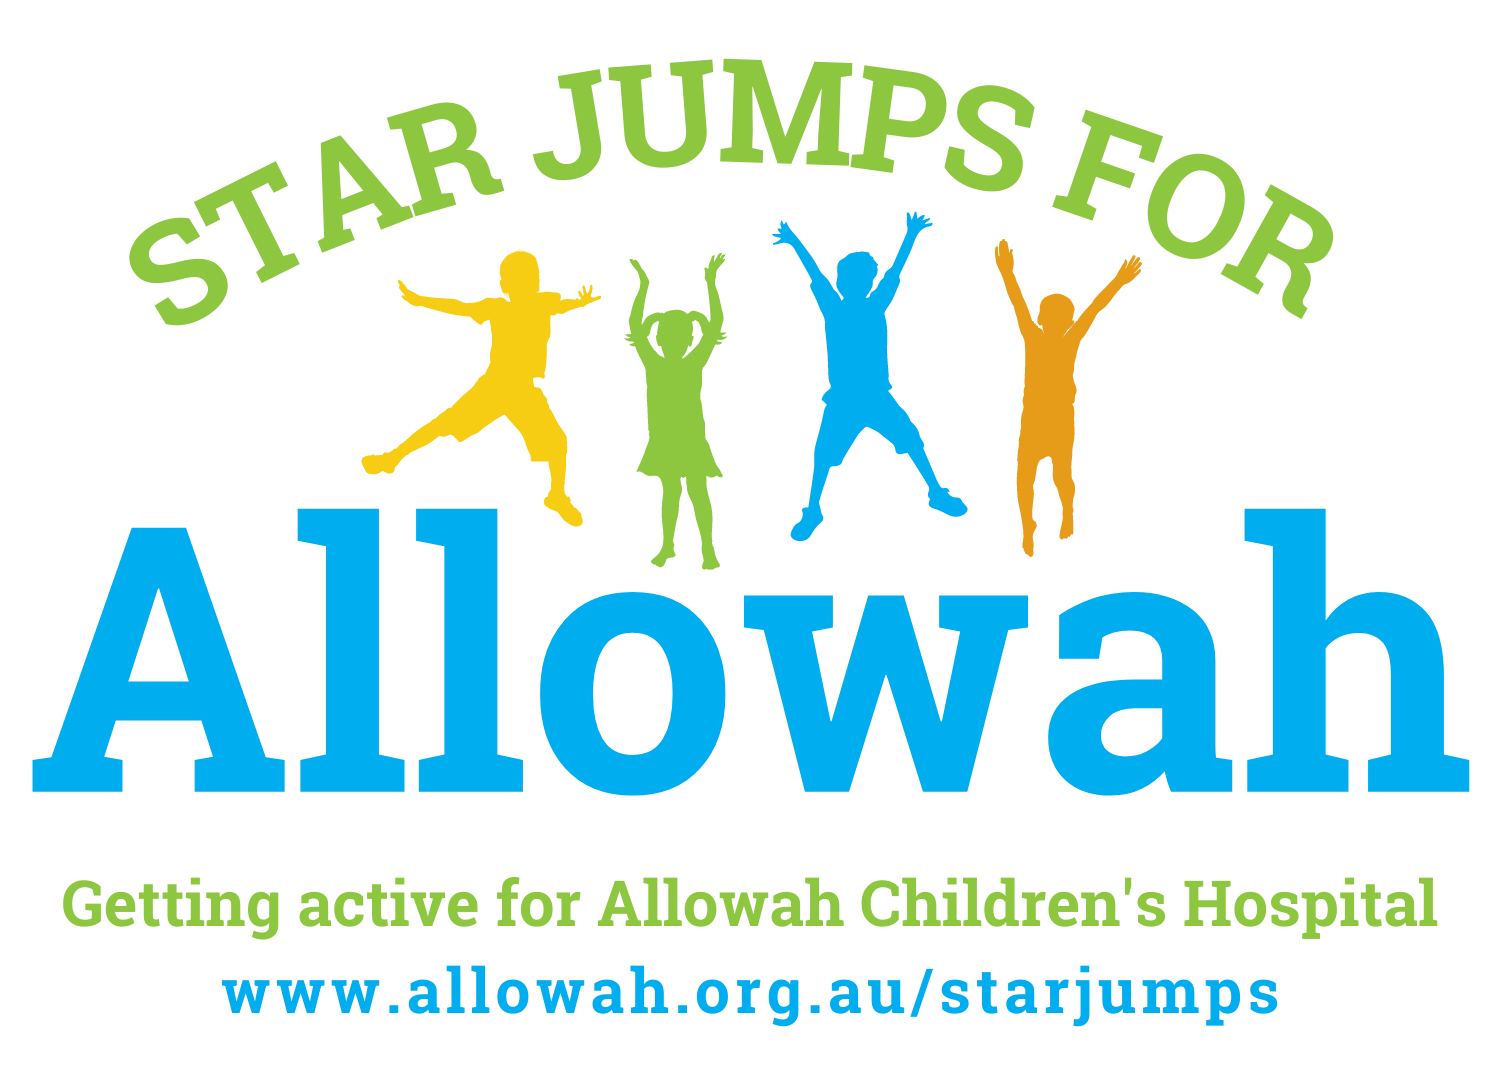 Star Jumps for Allowah